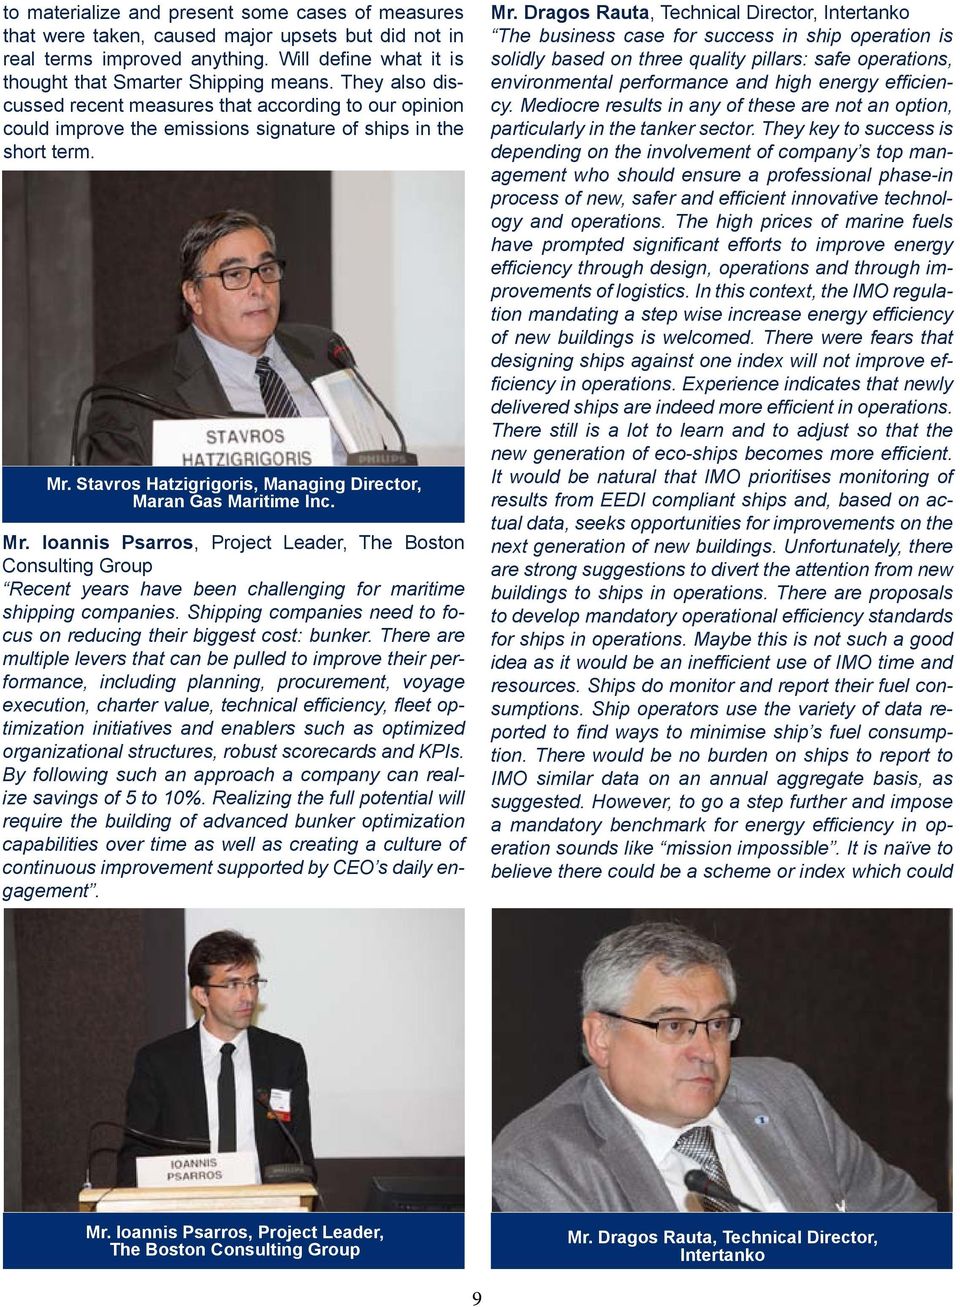 Stavros Hatzigrigoris, Managing Director, Maran Gas Maritime Inc. Mr. Ioannis Psarros, Project Leader, The Boston Consulting Group Recent years have been challenging for maritime shipping companies.